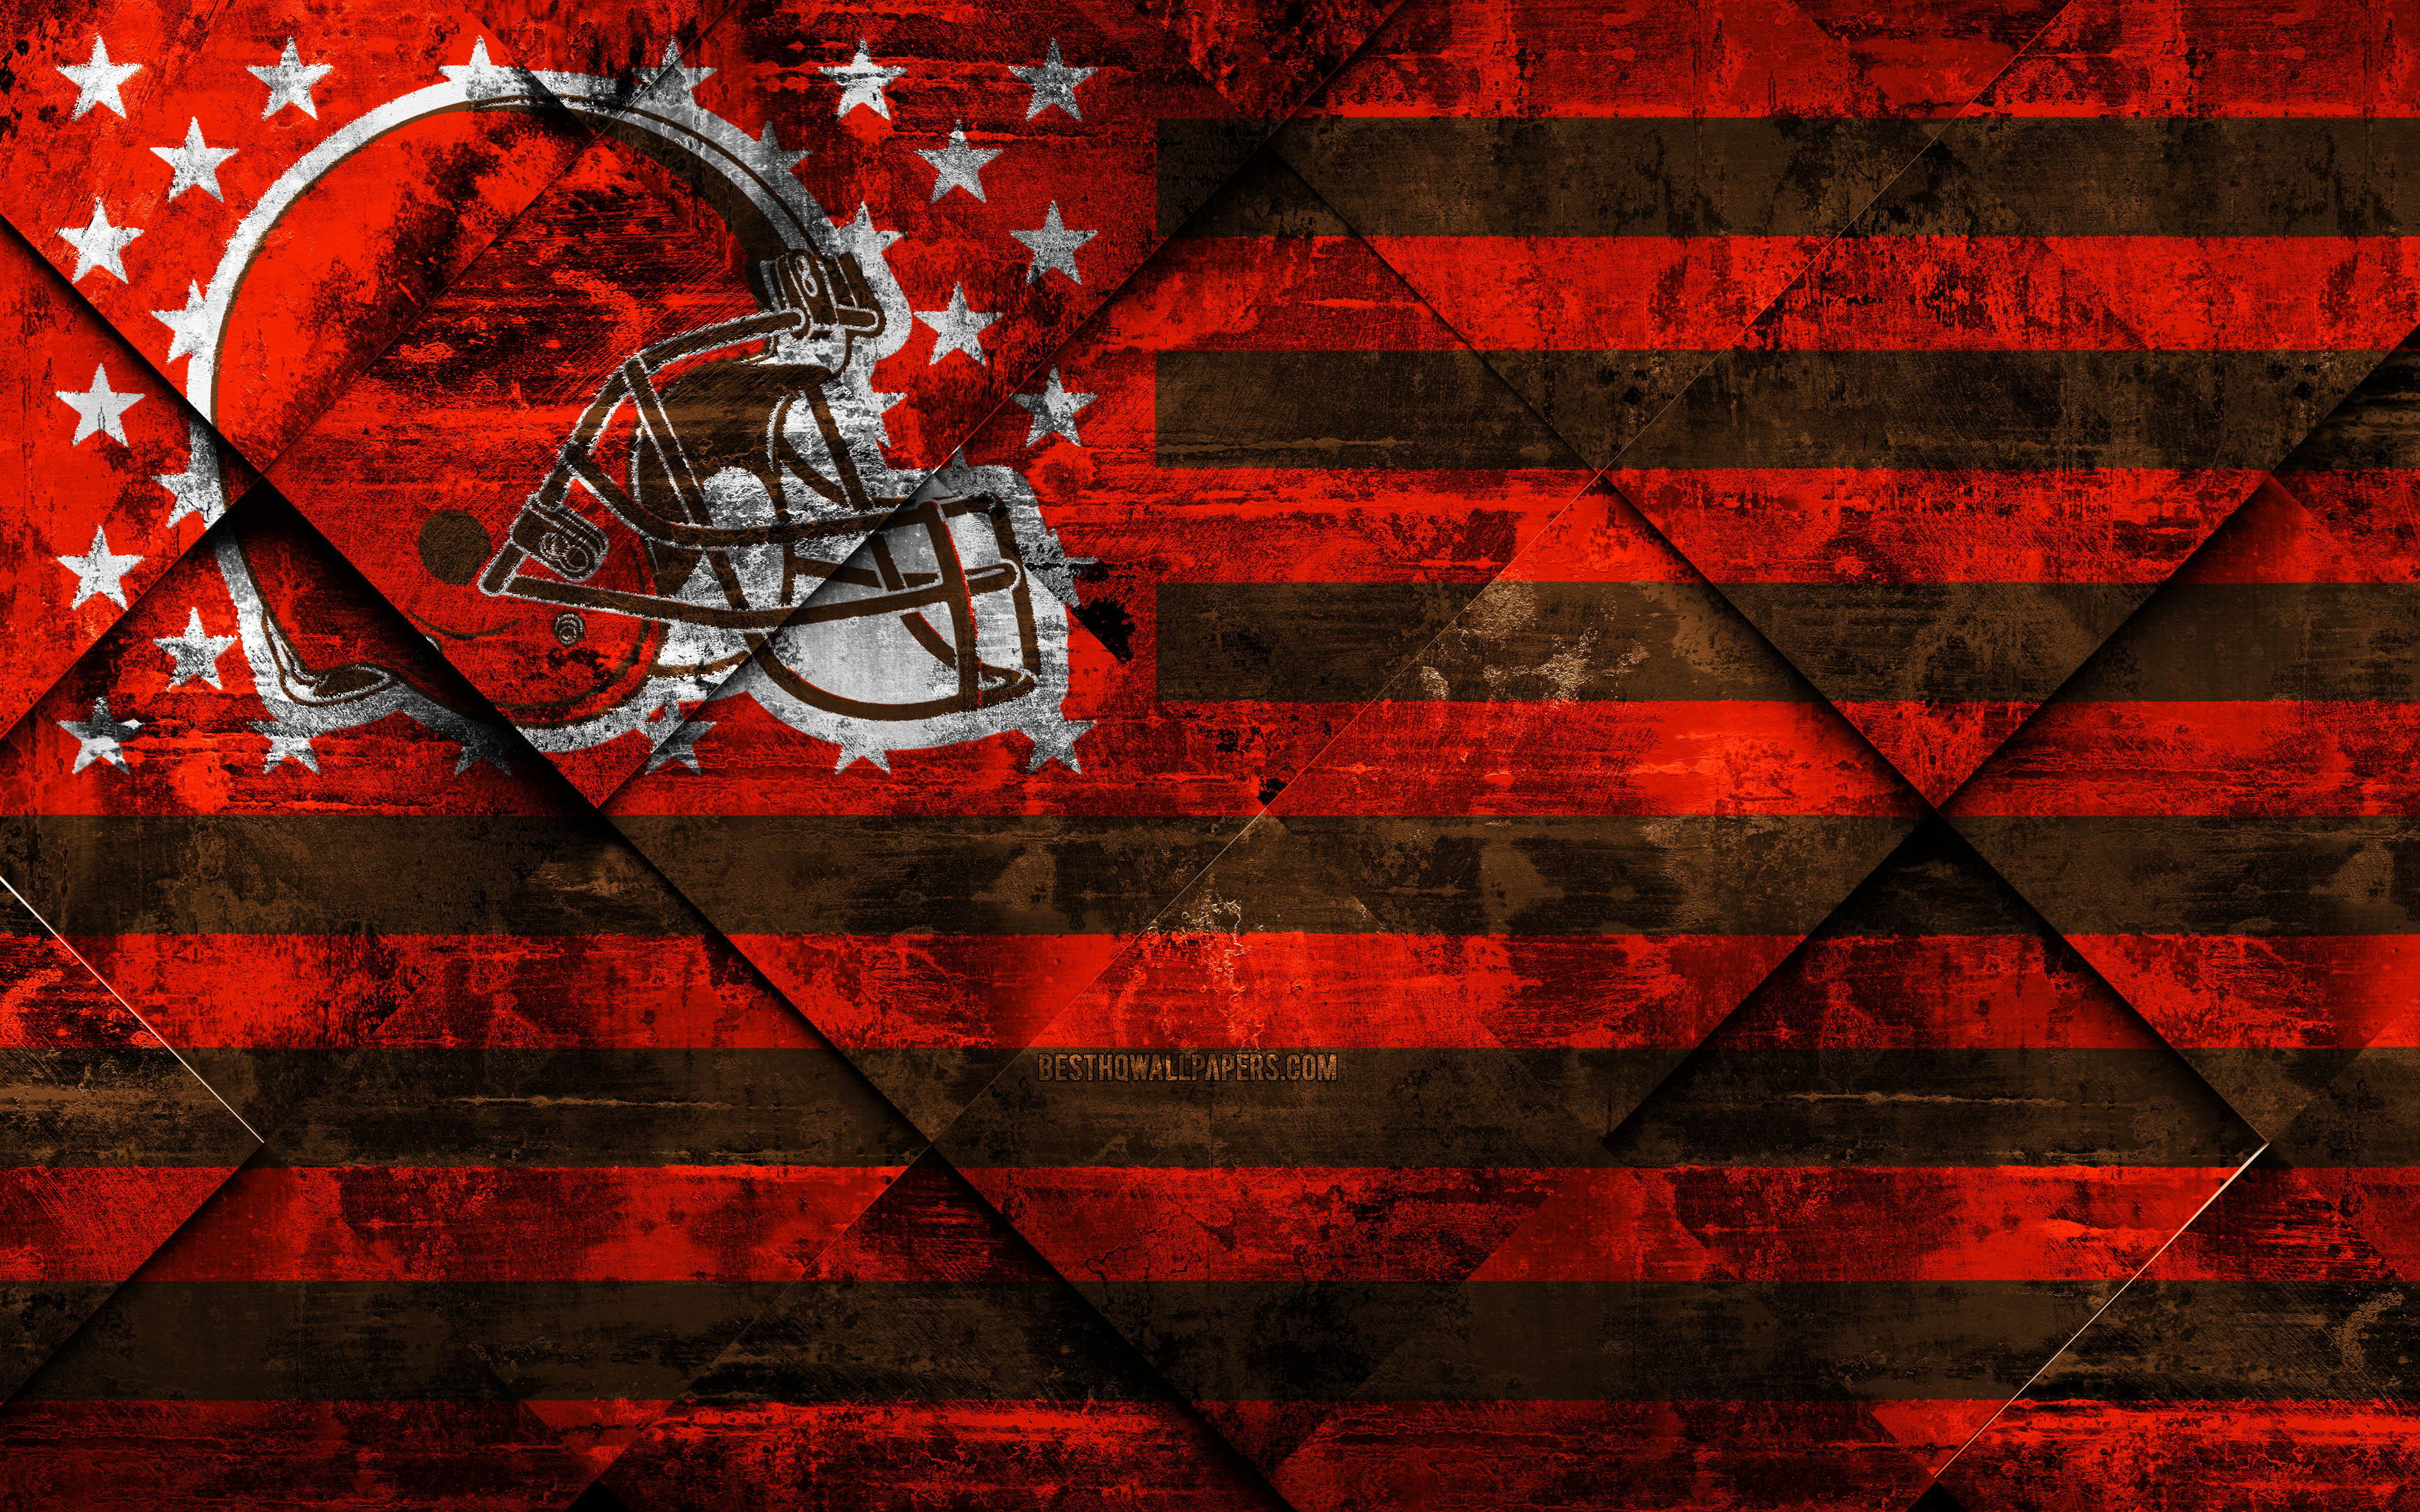 Download wallpaper Cleveland Browns, 4k, American football club, grunge art, grunge texture, American flag, NFL, Cleveland, Ohio, USA, National Football League, USA flag, American football for desktop with resolution 3840x2400. High Quality